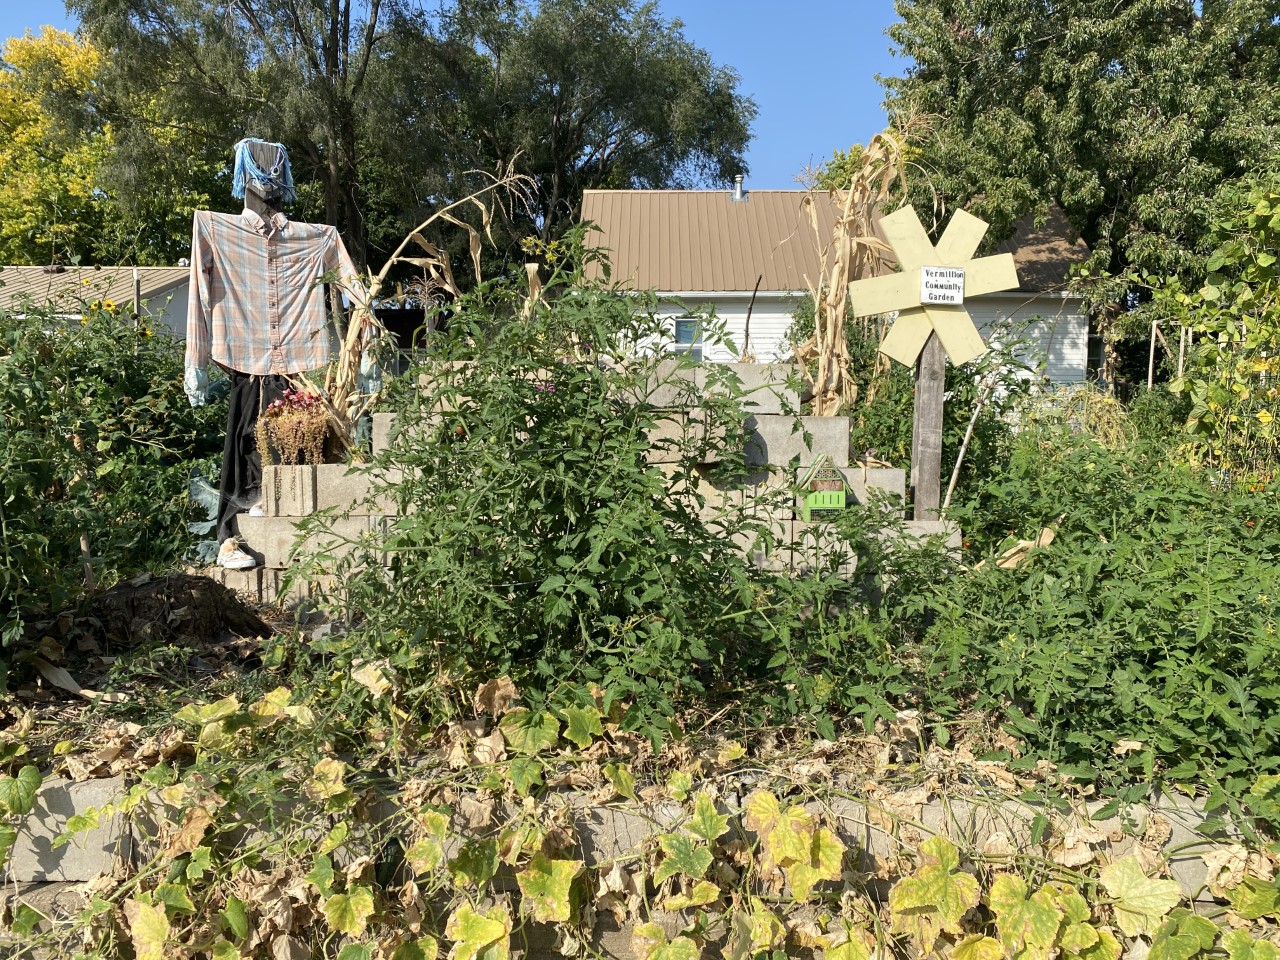 Local gardens grow community involvement, give back to Vermillion